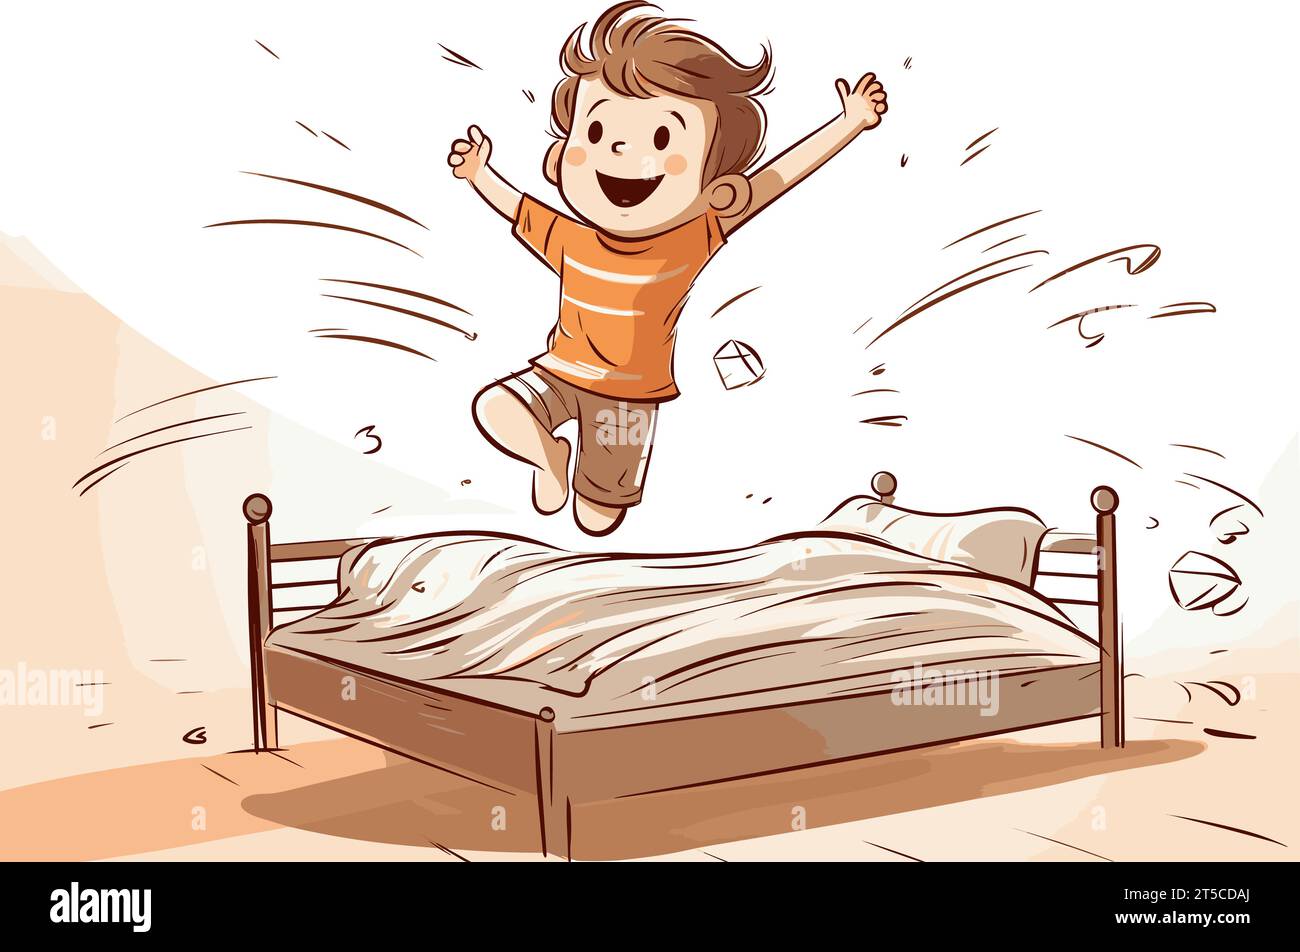 Drawing of happy cute little kid boy jump on bed illustration separated, sweeping overdrawn lines. Stock Vector